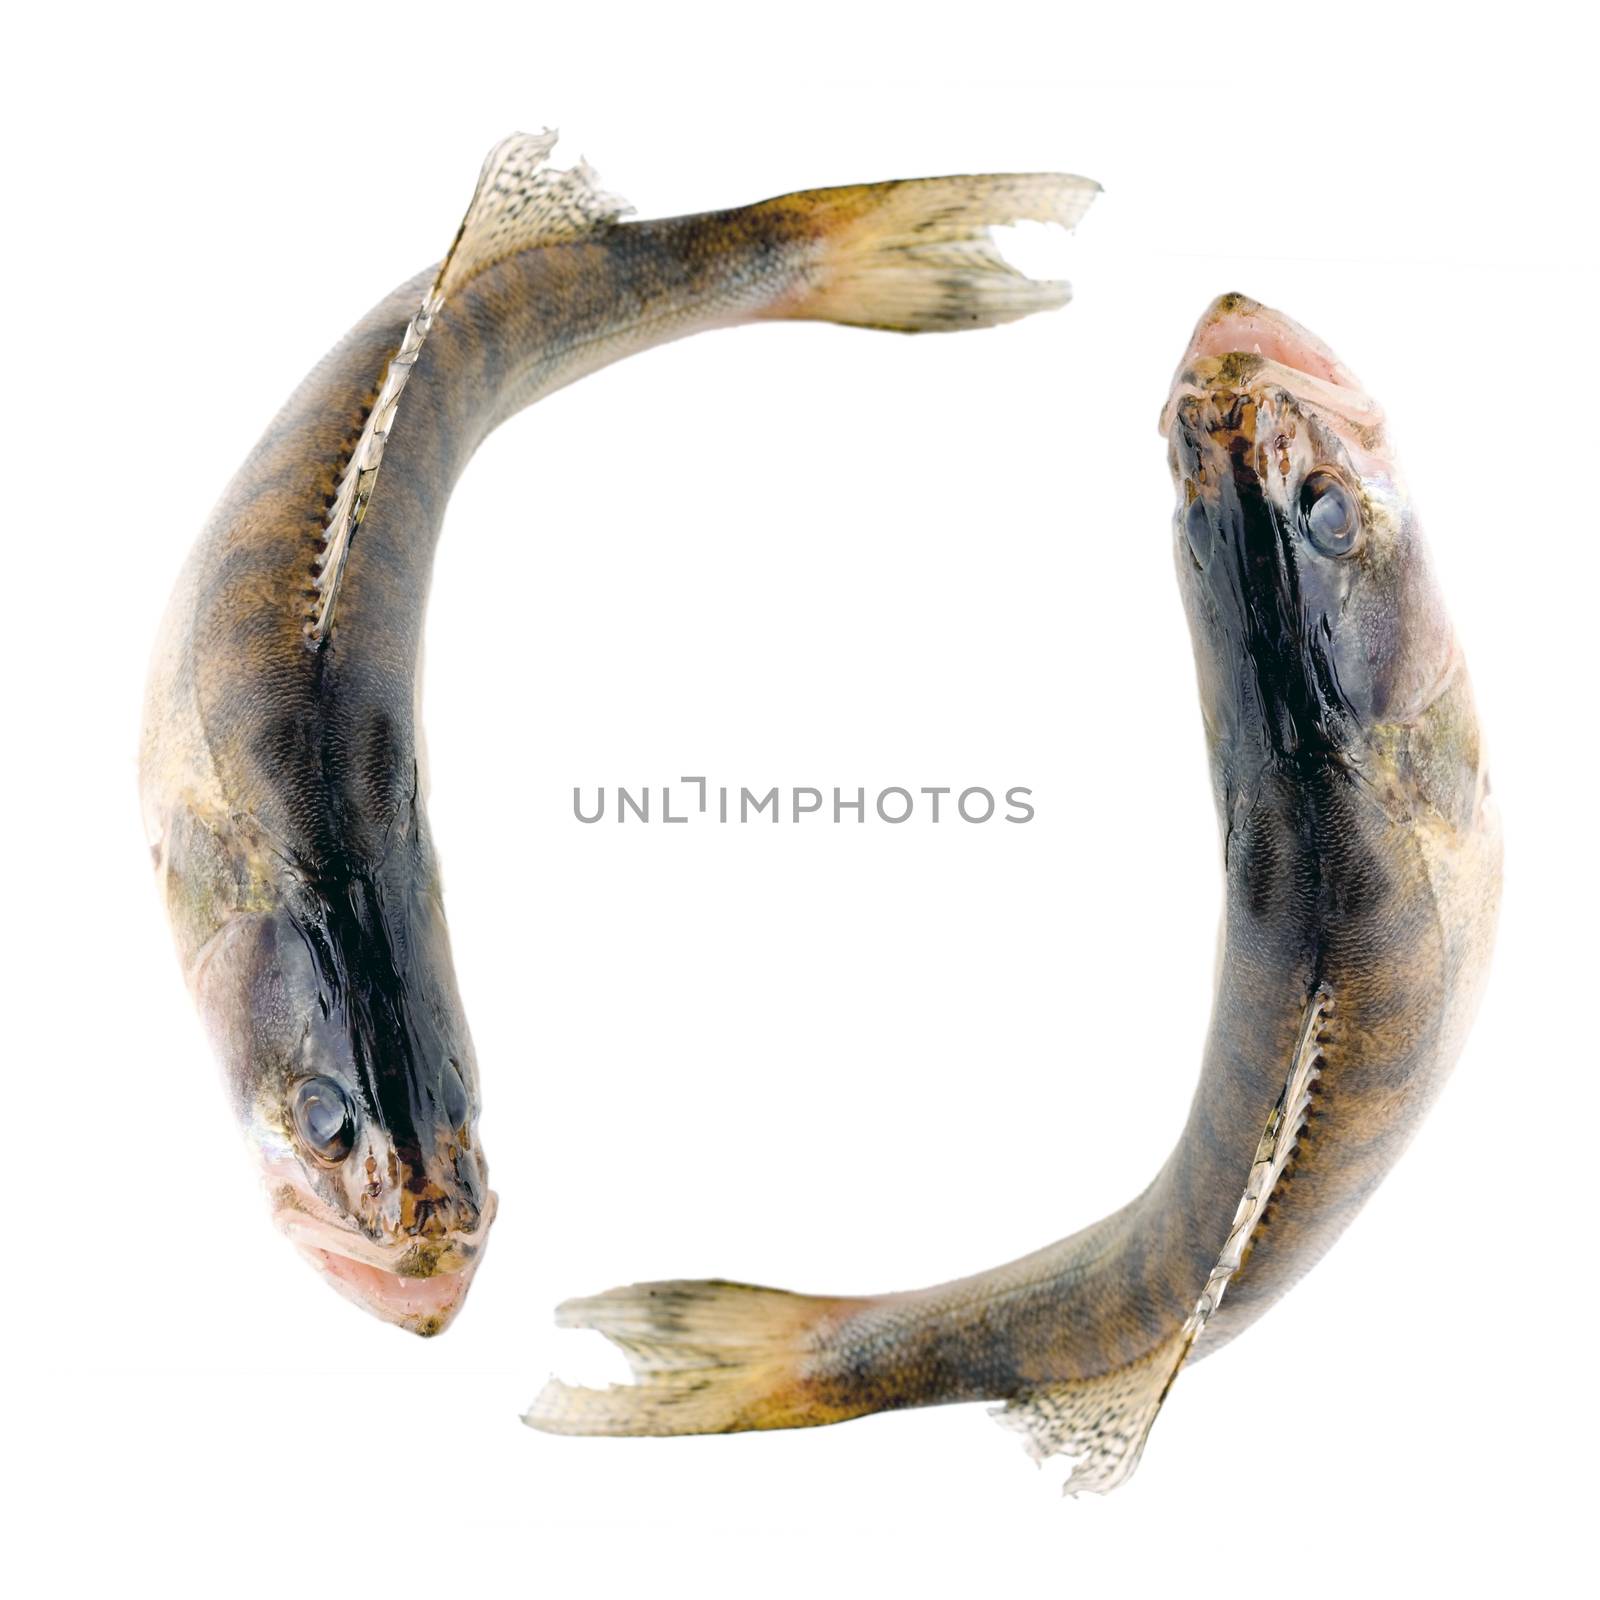 Walleye or Zander tail fish close up isolated on white background